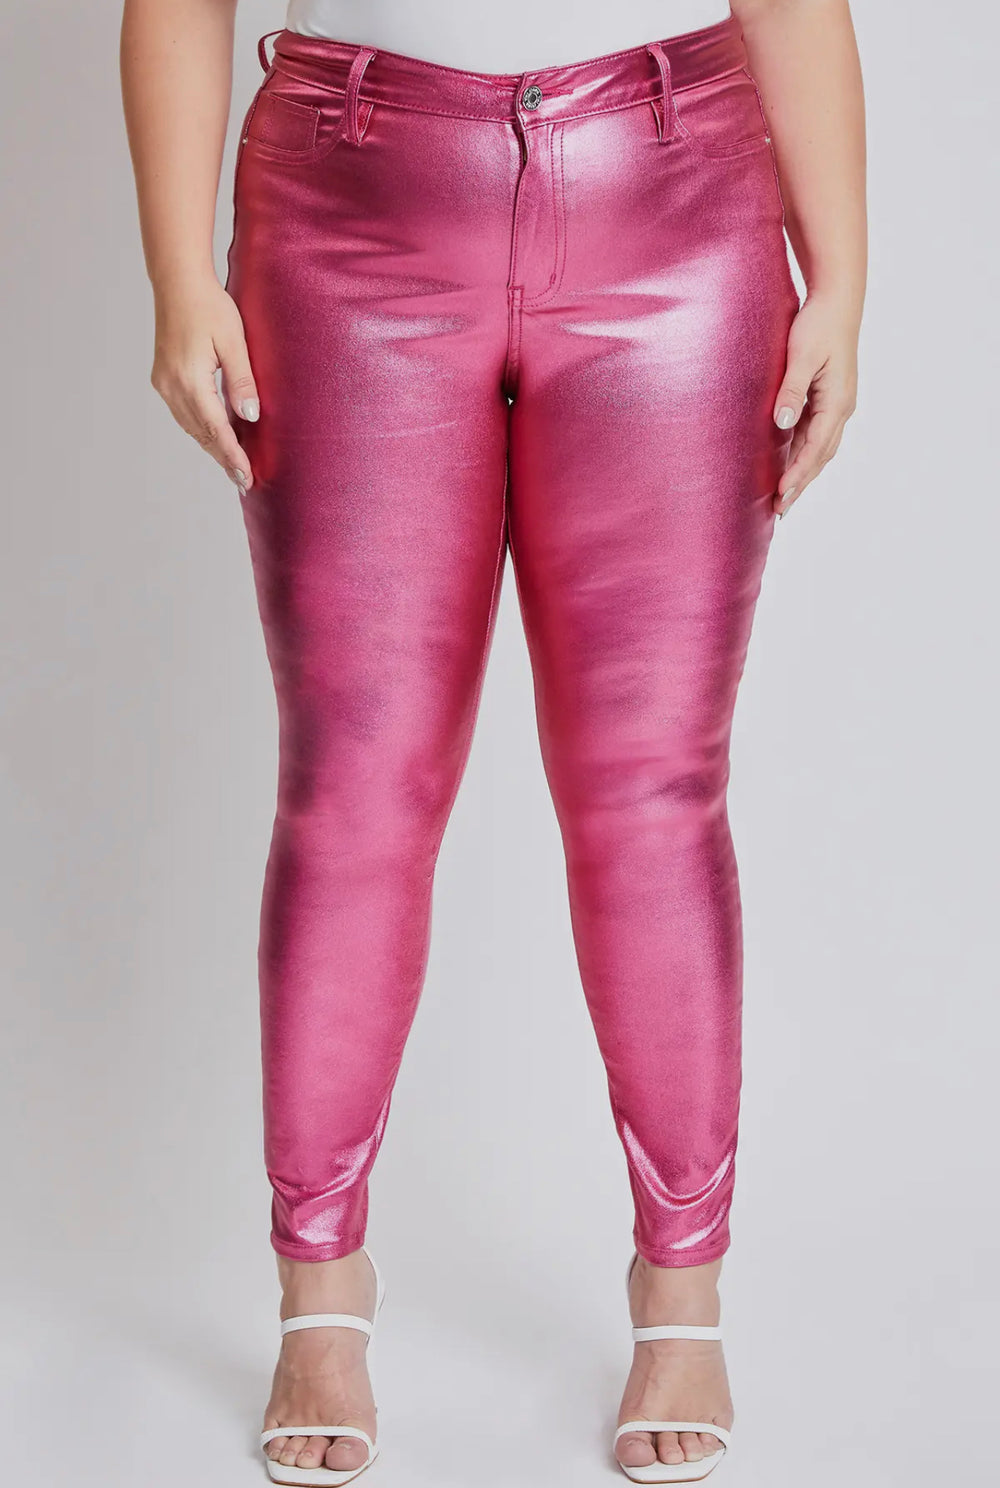 Jazzy YMI High Rise Metallic Skinny Jeans, Hot Pink-Pants-Inspired by Justeen-Women's Clothing Boutique in Chicago, Illinois